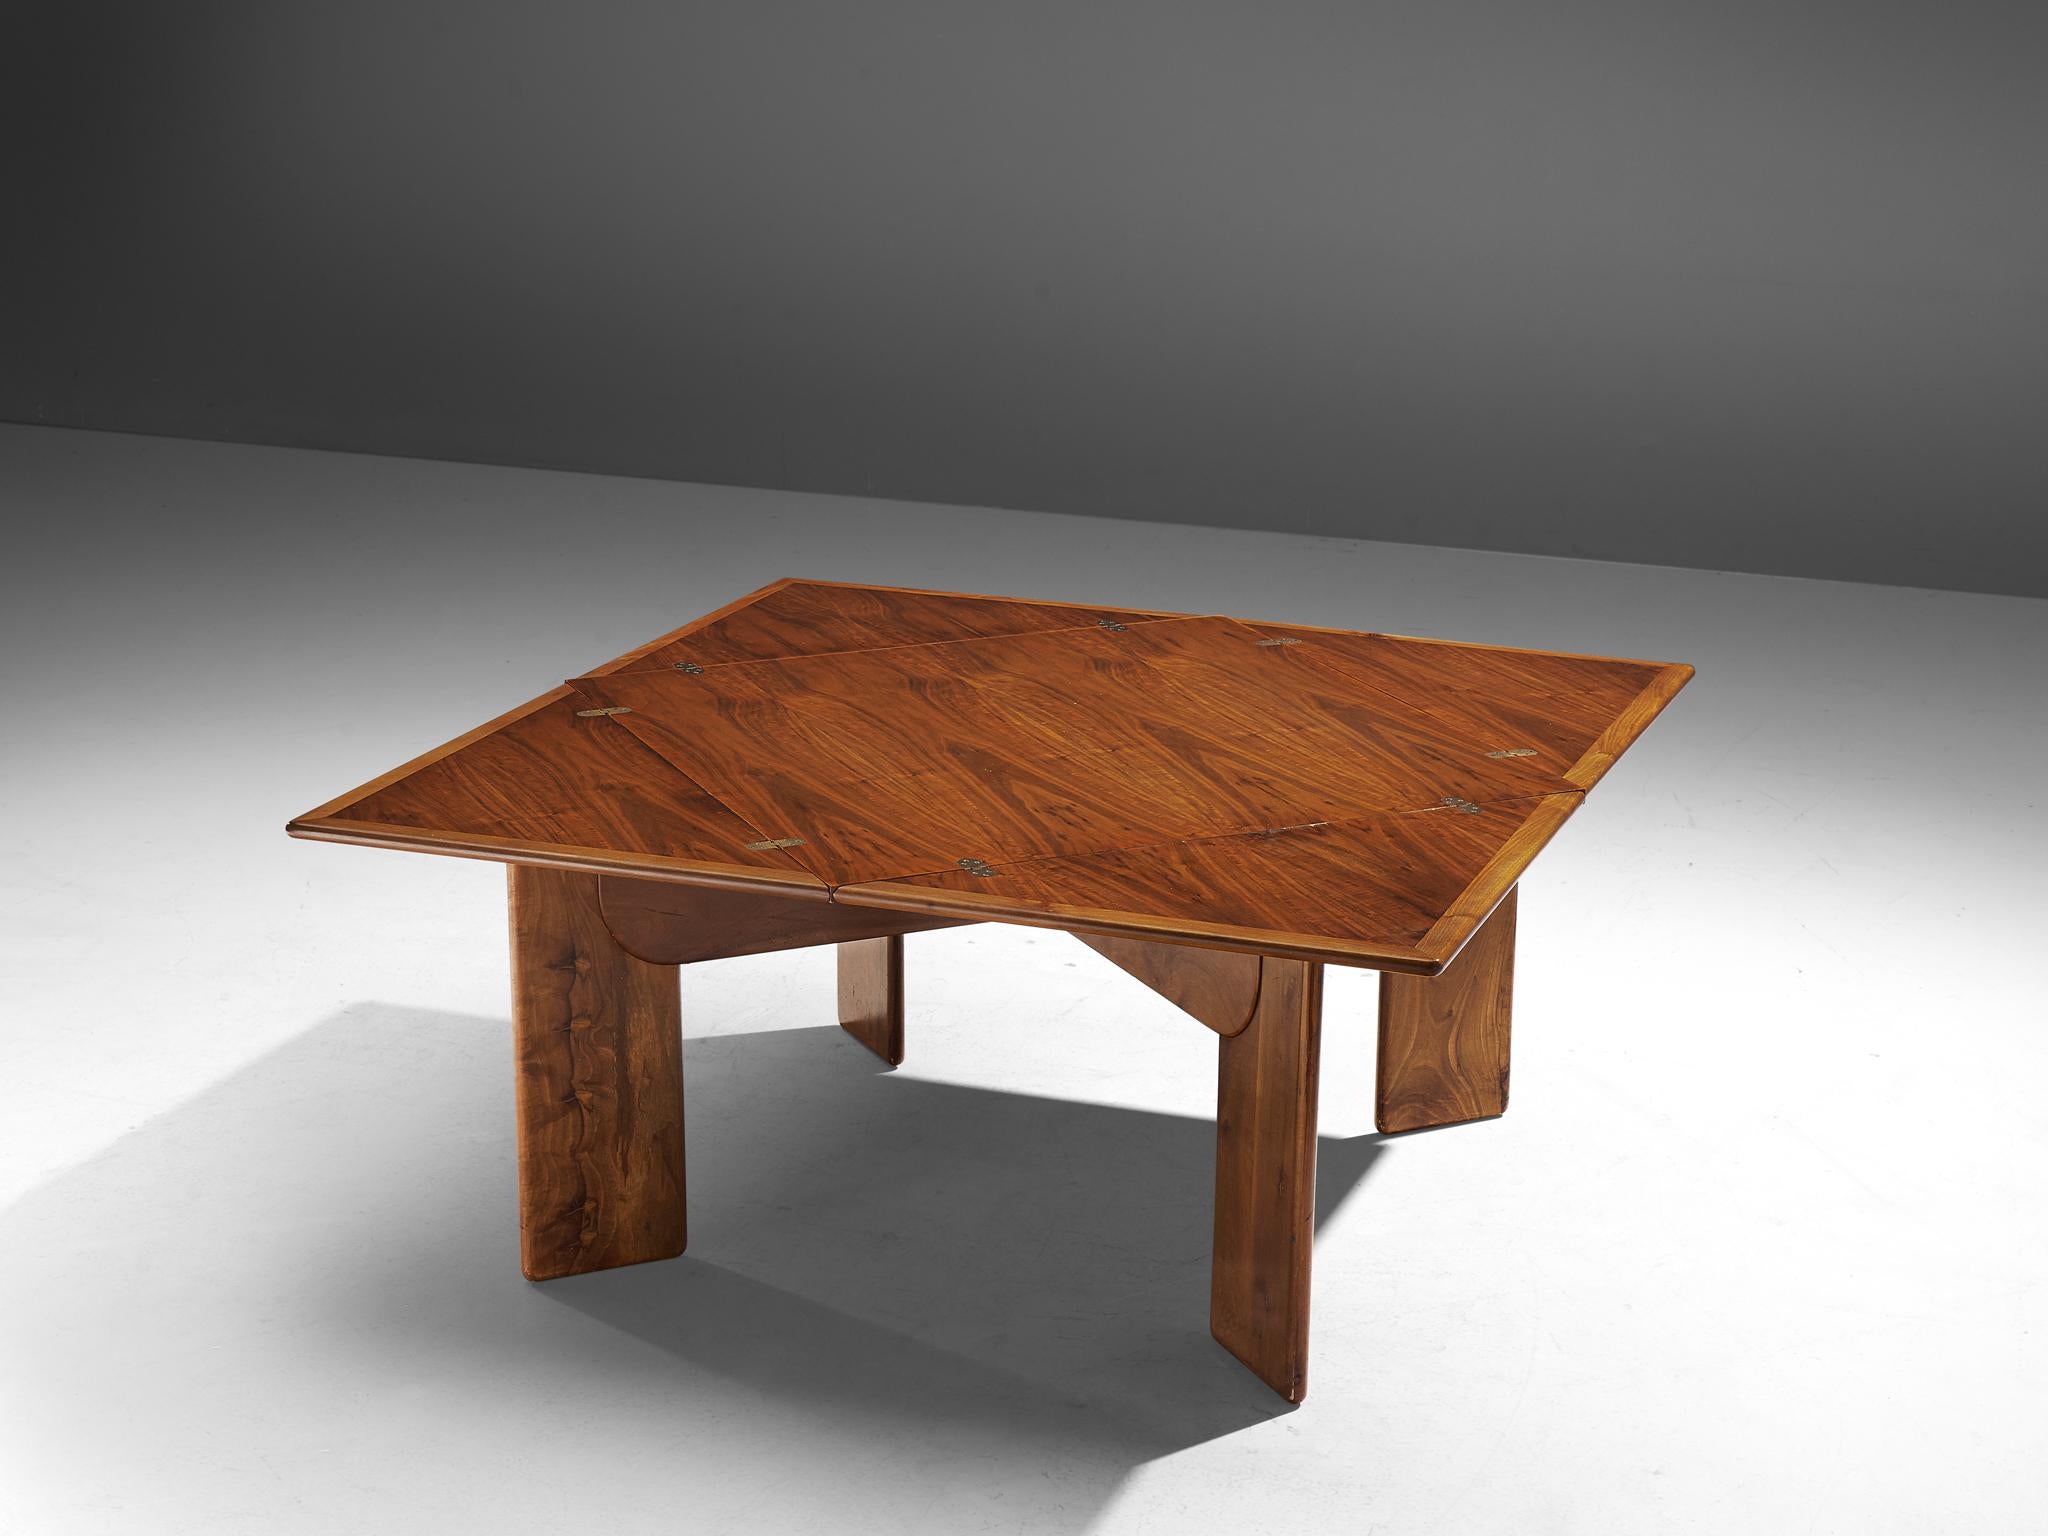 Extendable dining table, walnut, brass, Italy, 1970s

Stunning square shaped dining table with a flap tabletop. This dining table is made in beautiful walnut wood, featuring striking, warm tones in the grain. The foldable tabletop is finished with